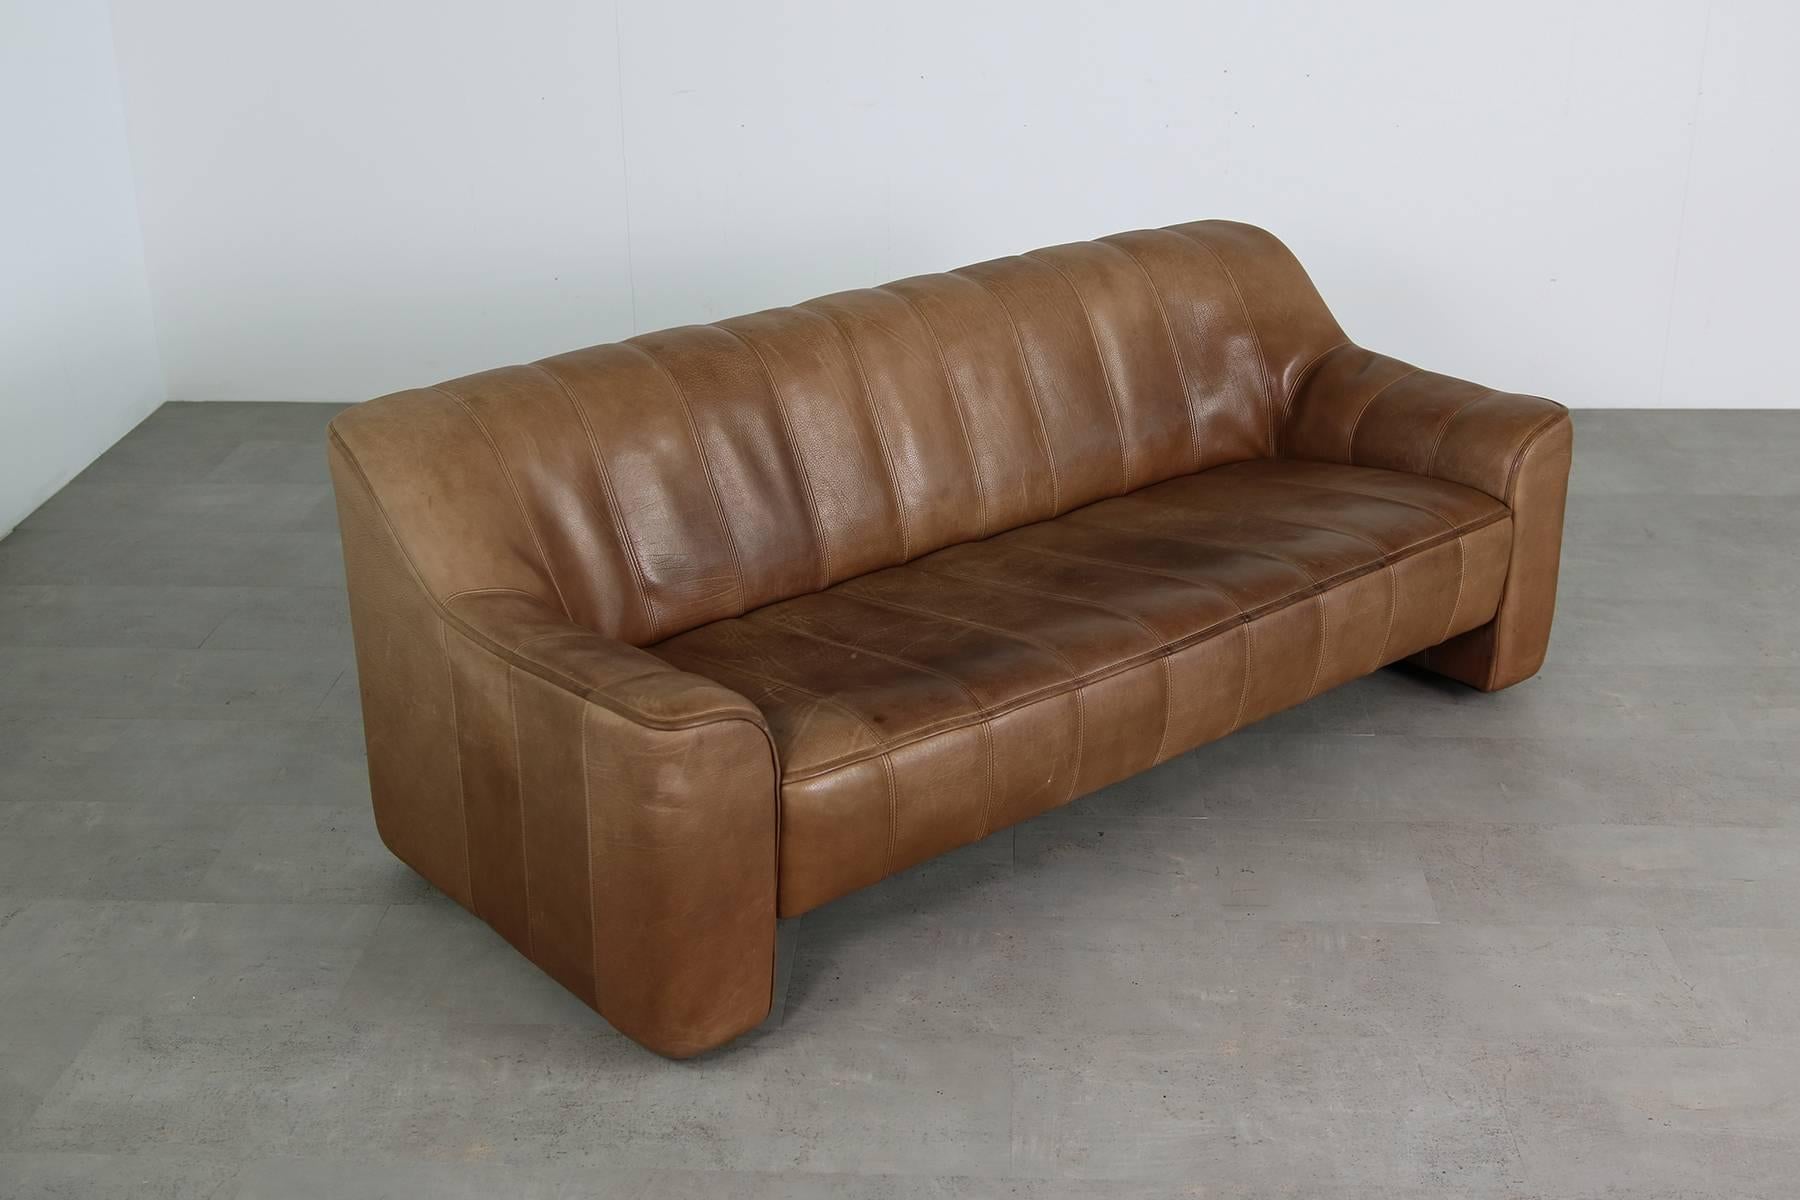 Beautiful three-seat De Sede sofa, in beautiful brown/dark cognac shades, De Sede Mod. DS 44 from the 1970s out of production! Buffalo leather, free standing. Extendable seat, amazing and unique patina, fantastic condition, super high quality, super